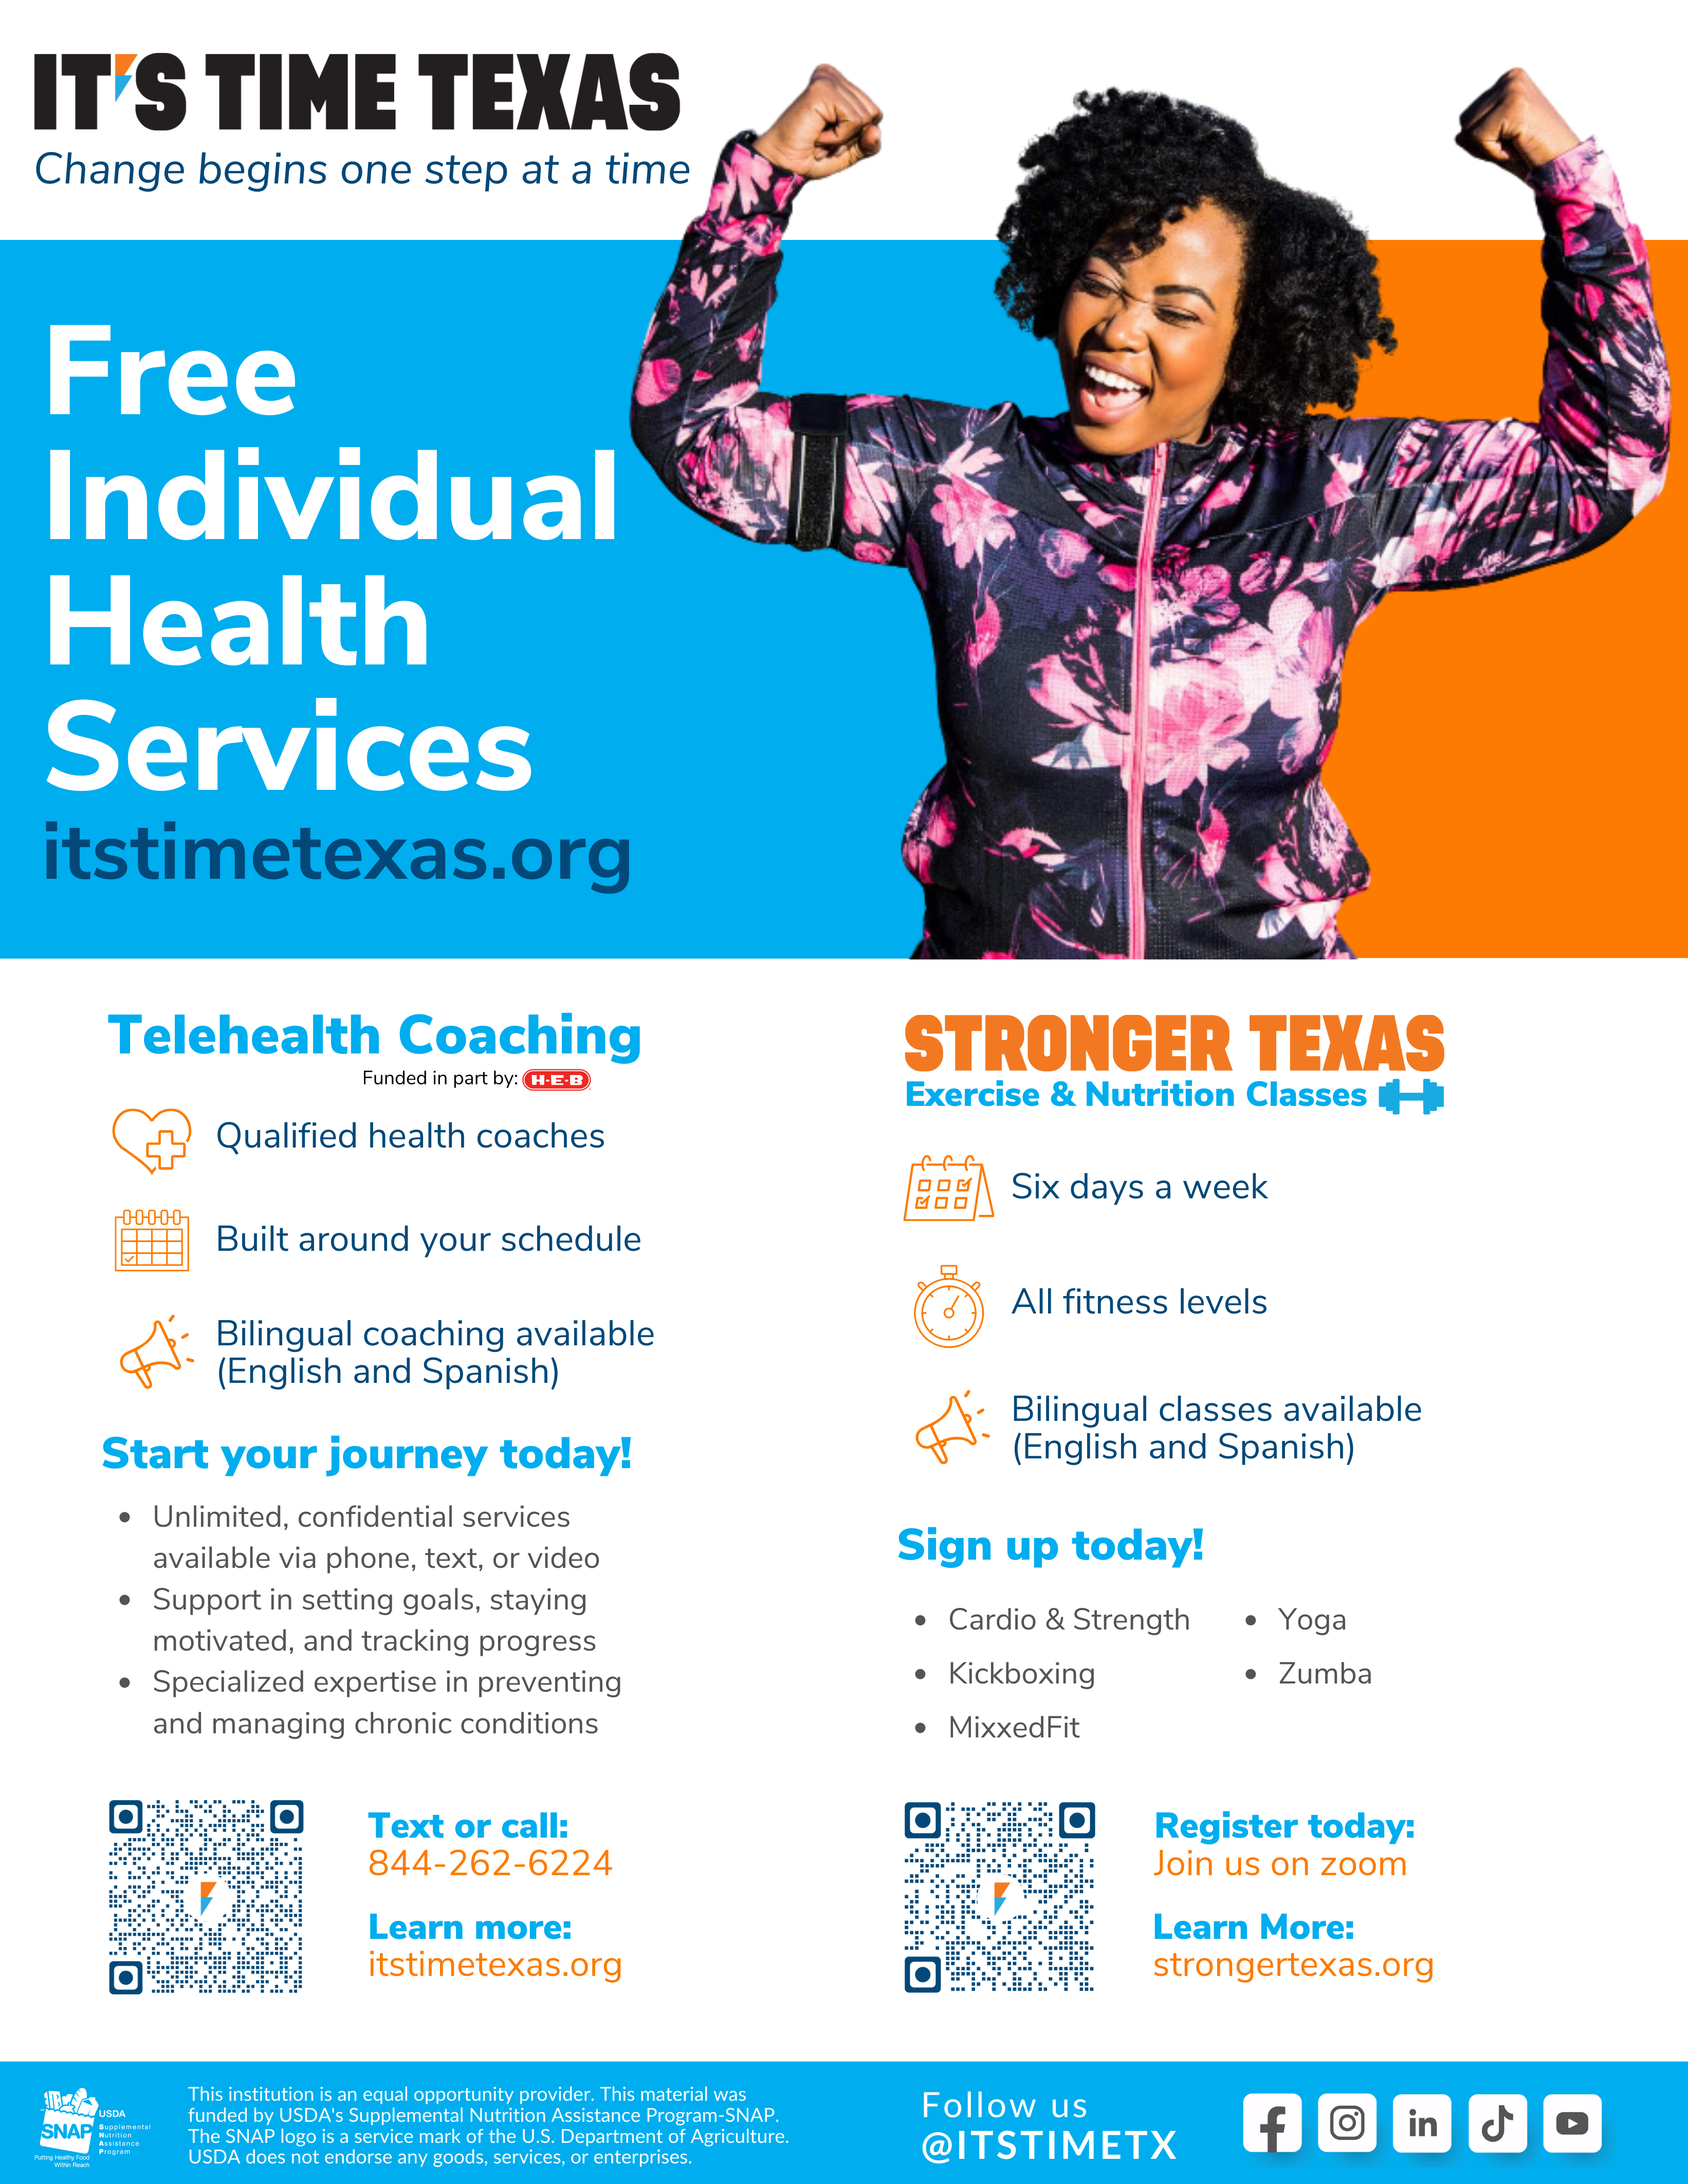 Free Health Services Flyer (English)